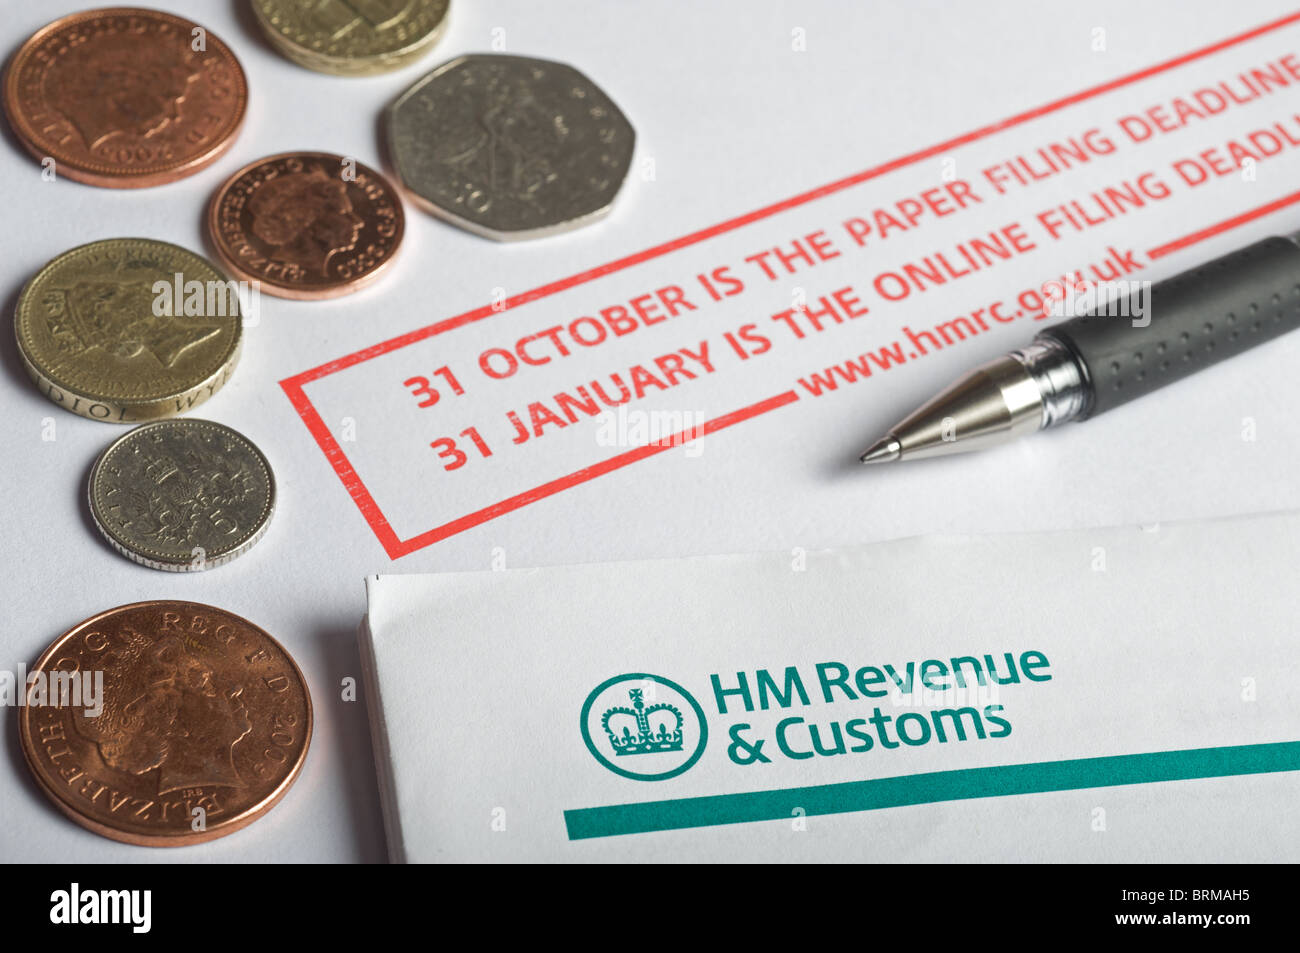 hmrc-to-end-100-fines-for-late-self-assessment-tax-returns-daily